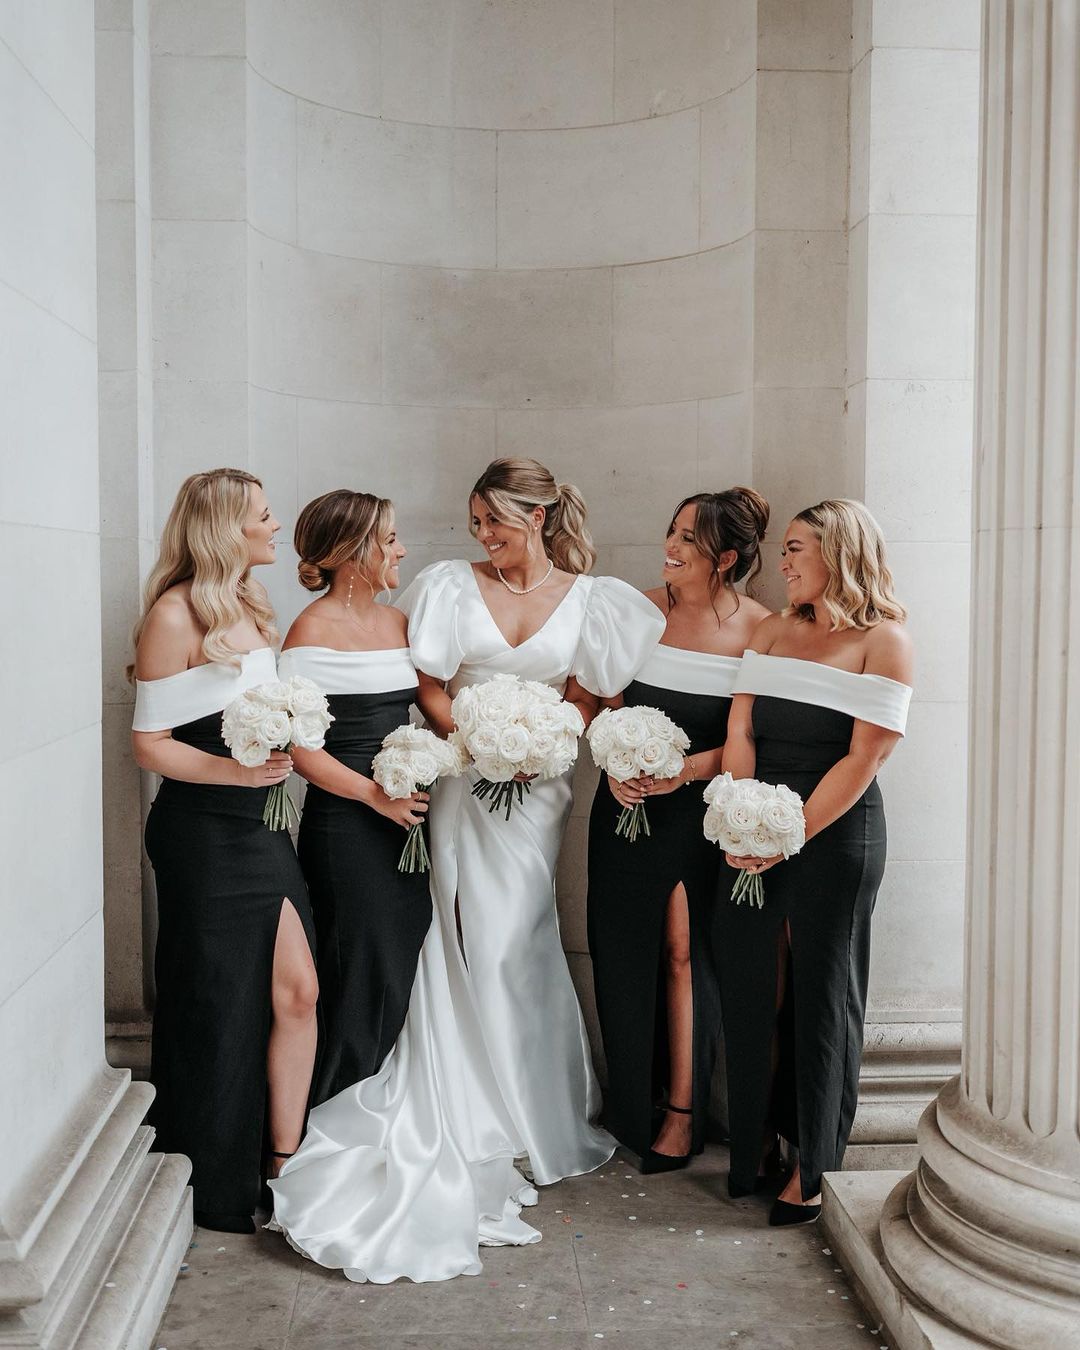 black and white bridesmaids for a black tie wedding in london